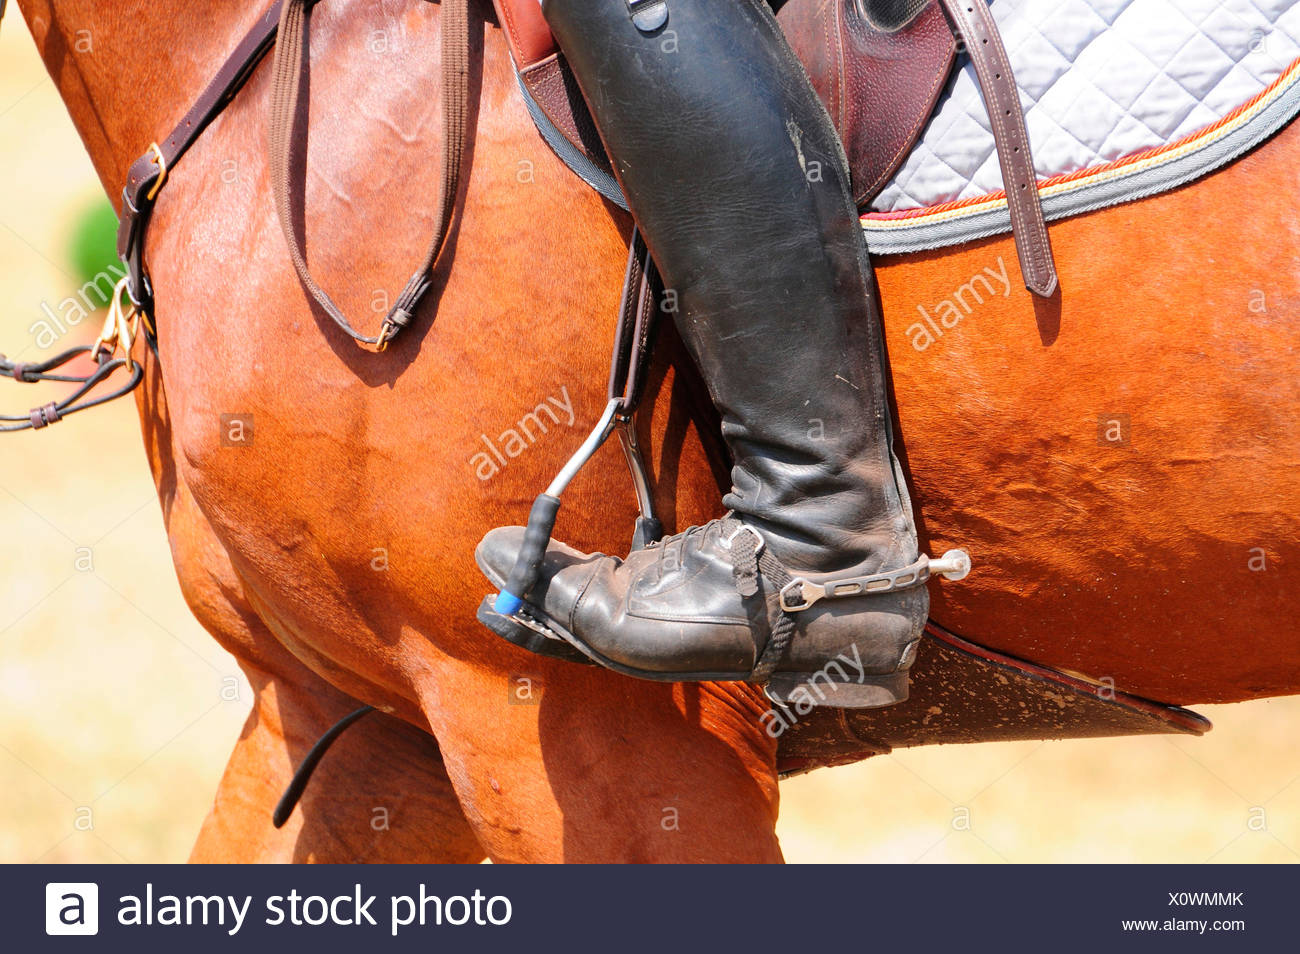 Riding Boots Stock Photos & Riding Boots Stock Images - Alamy